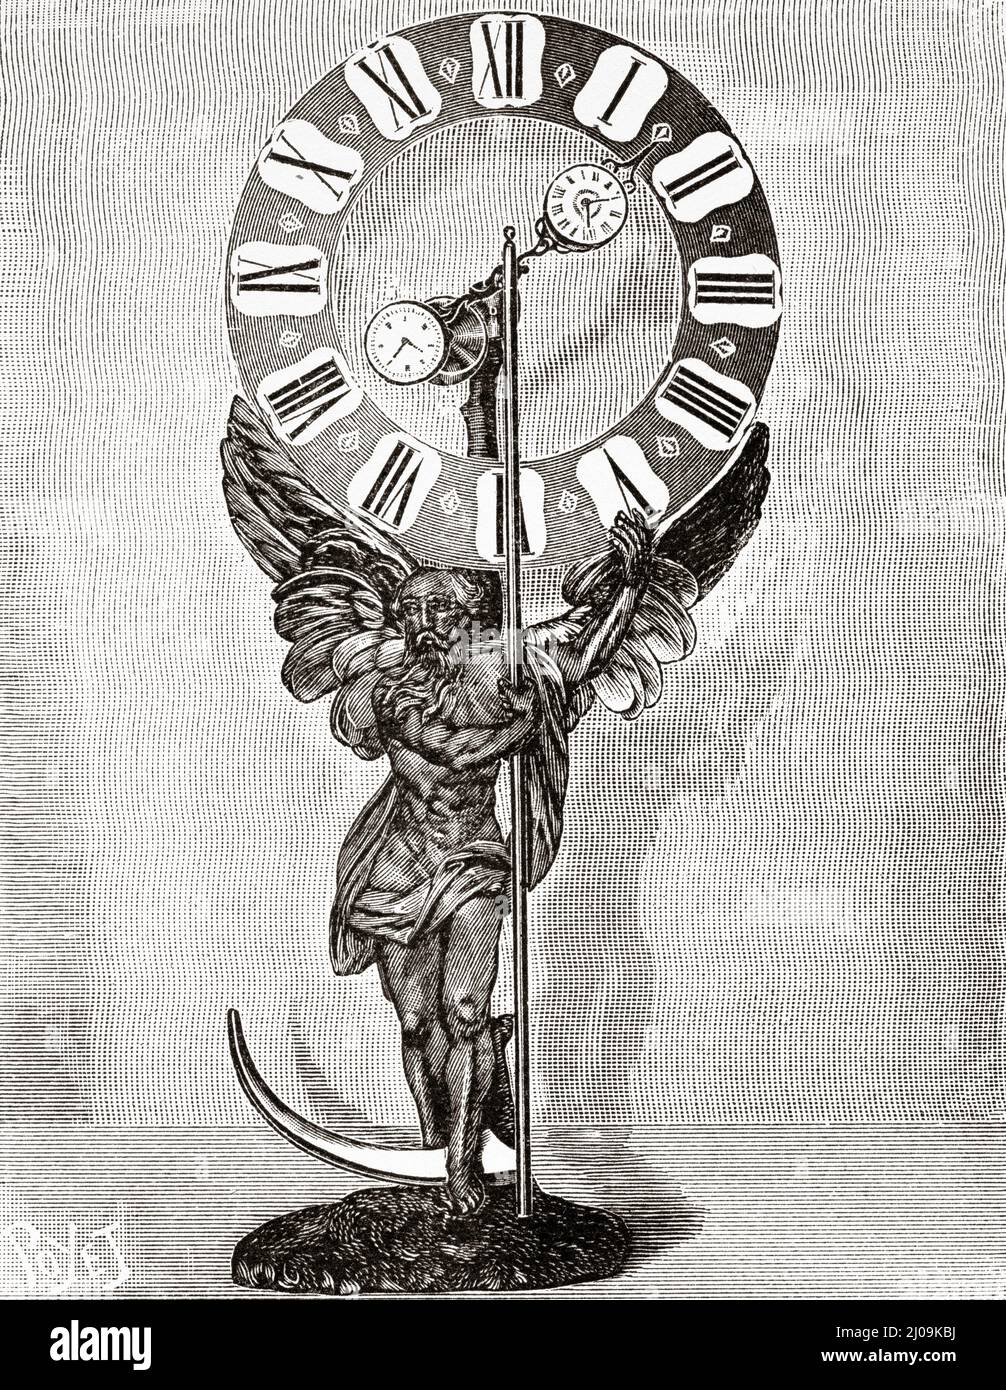 Mysterious clock. Eighteenth century mystery clock. Old 19th century engraved illustration from La Nature 1899 Stock Photo